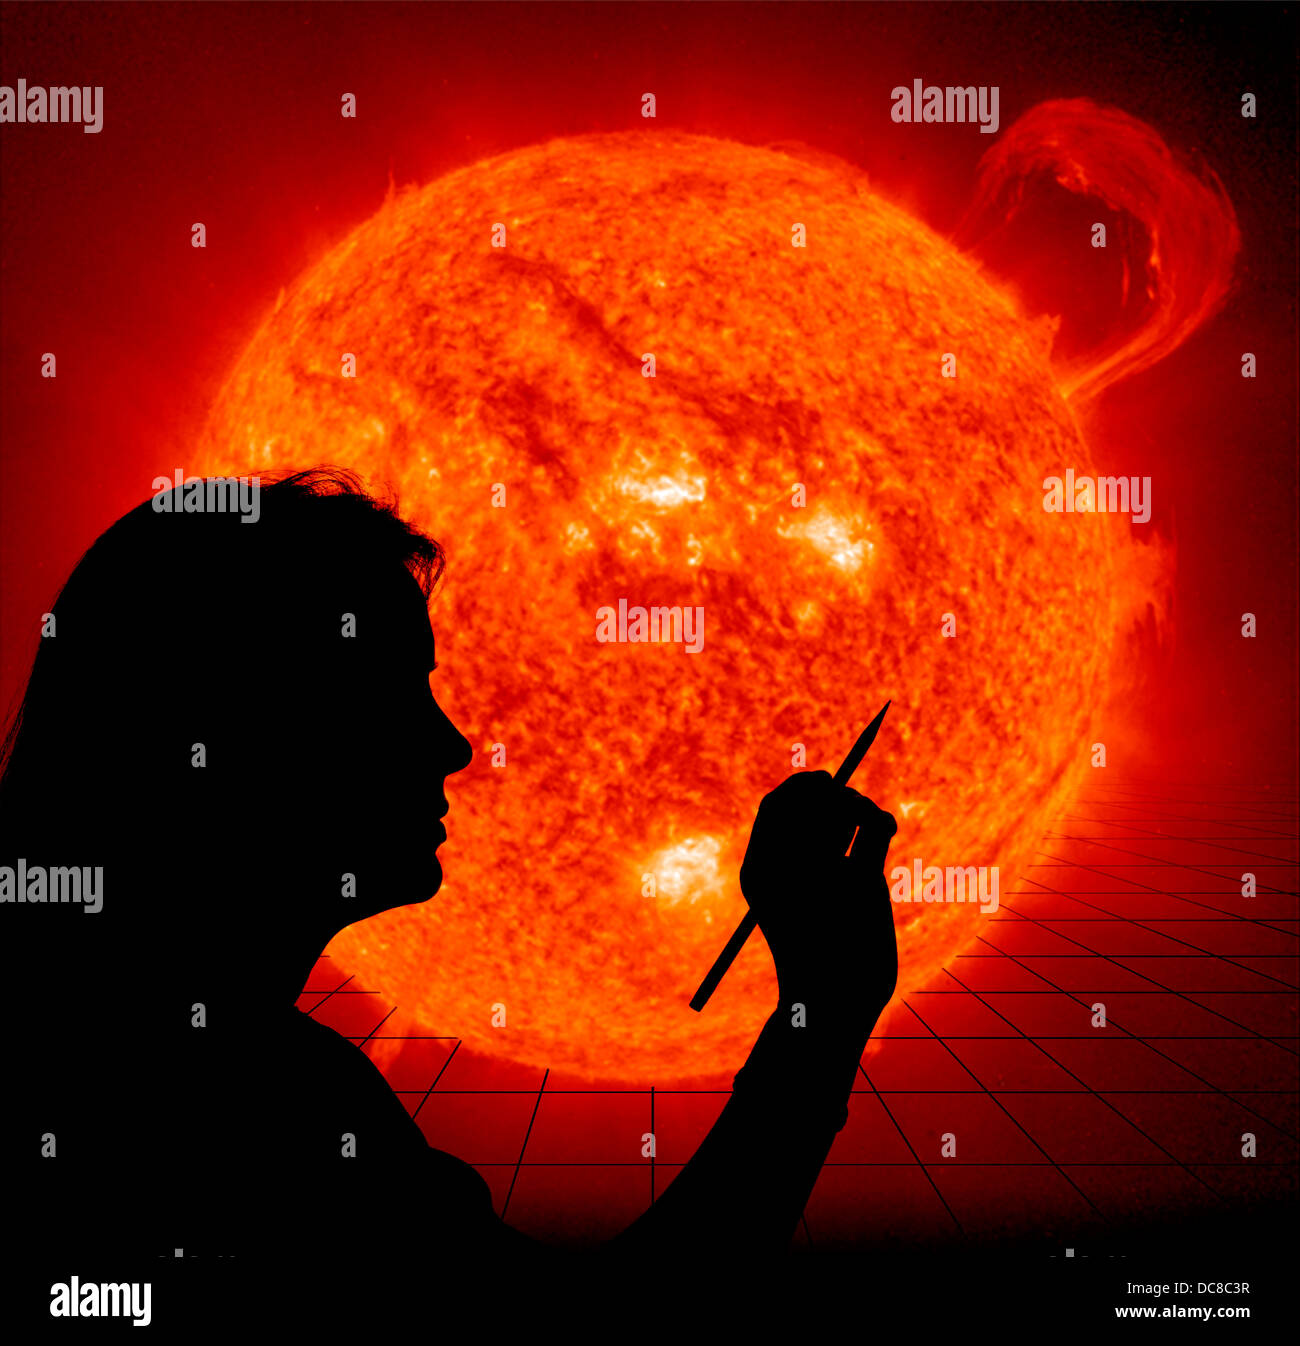 Woman science teacher discussing sun flares on screen with perspective grid Stock Photo